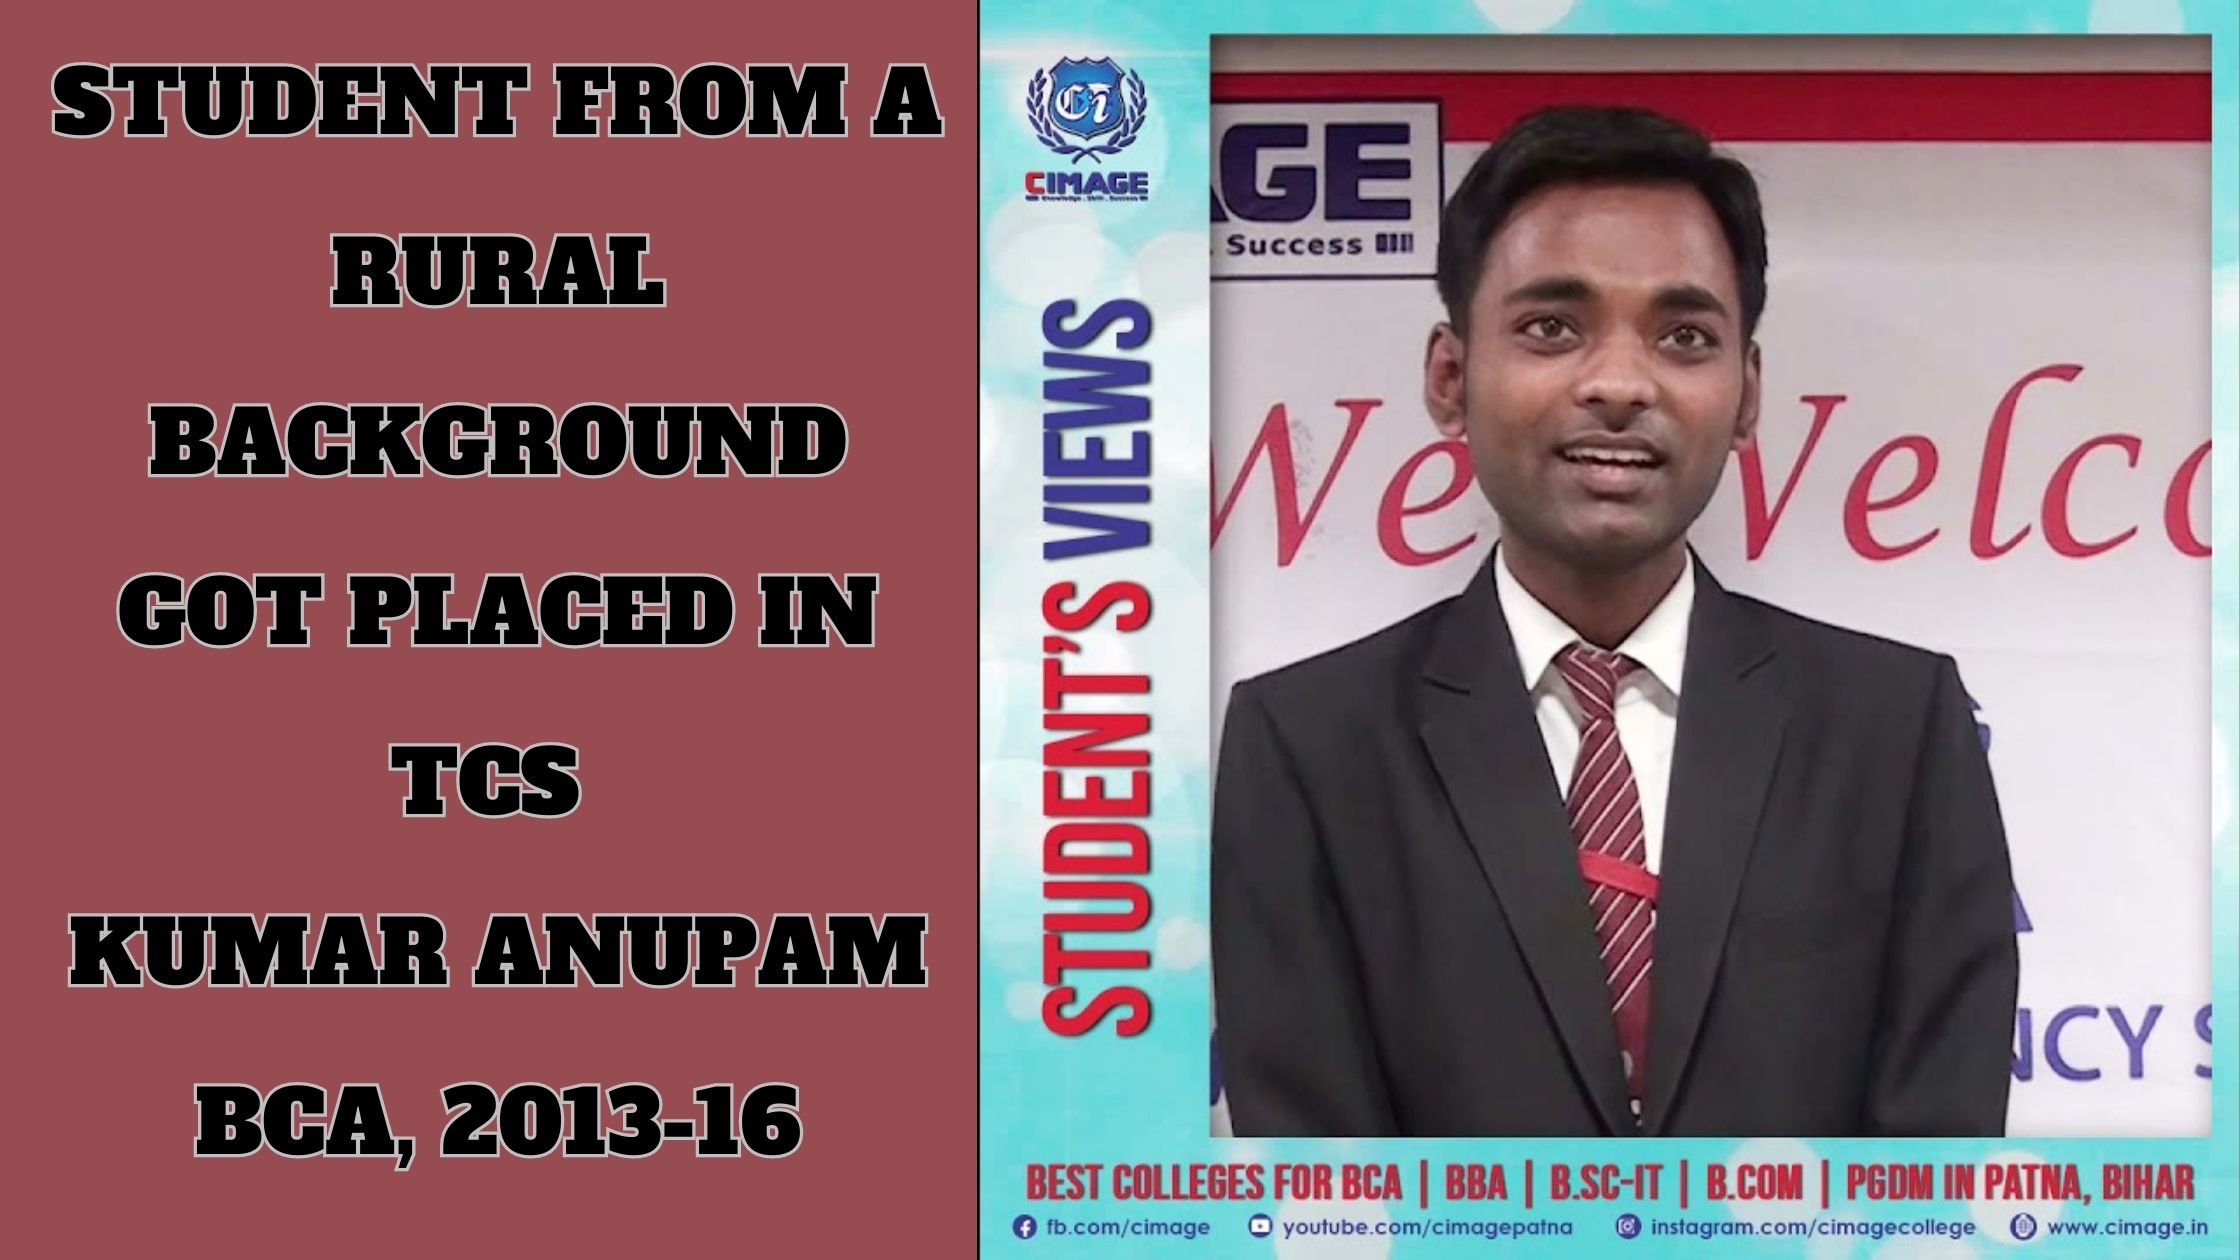 Student From A Rural Background of CIMAGE College got Placed In TCS